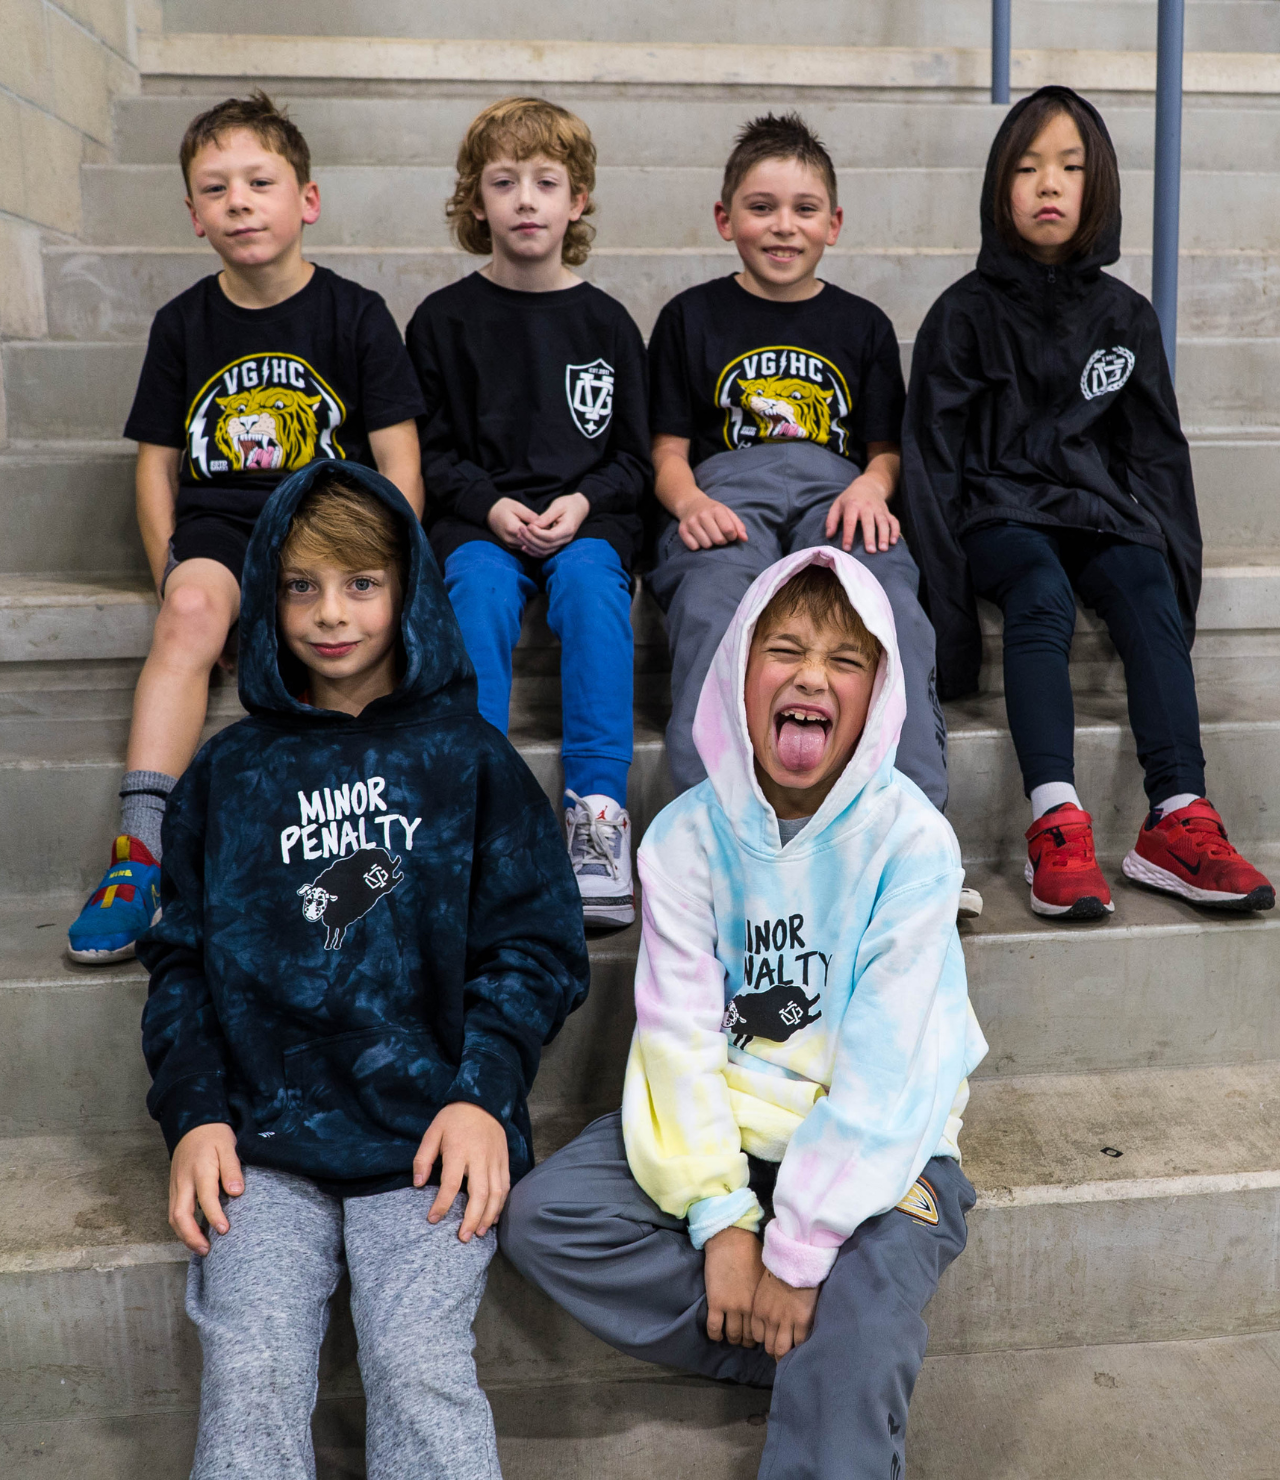 Lifetipsforbetterliving hockey clothing company - built by hockey fans for hockey fans. New kids youth apparel available today. Shop the entire youth hockey apparel collection today!